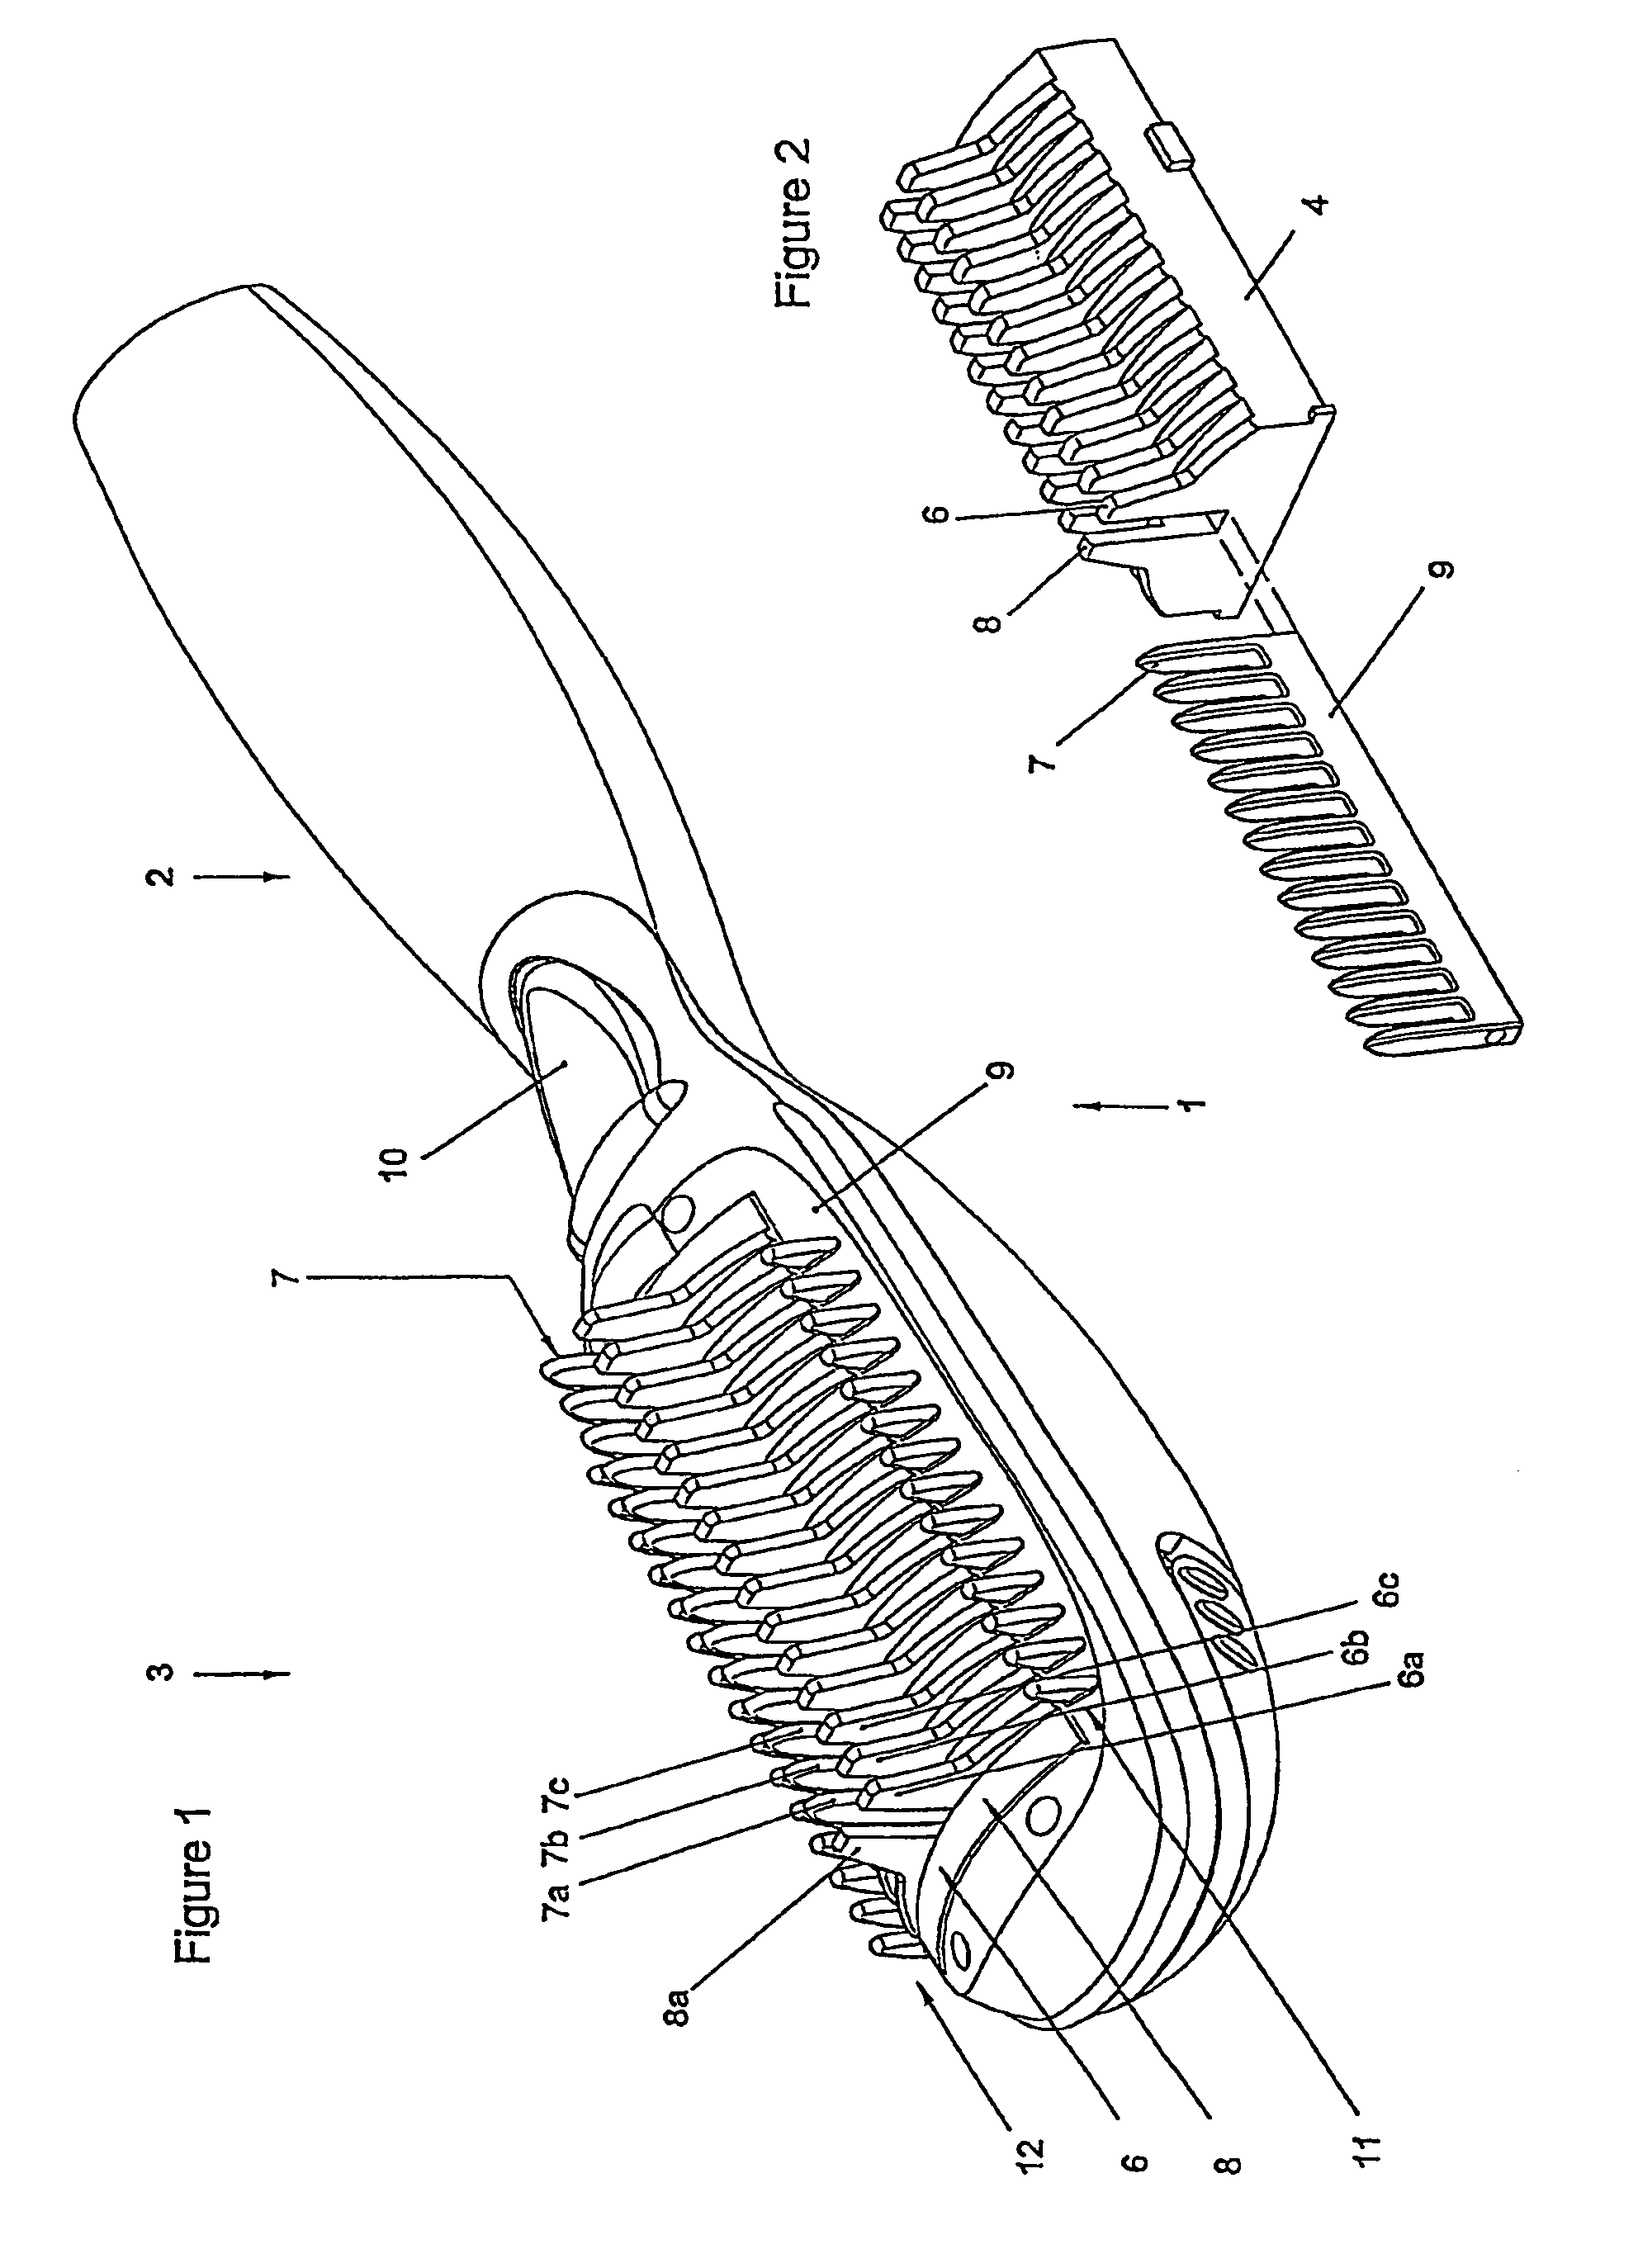 Hair straightening and styling device